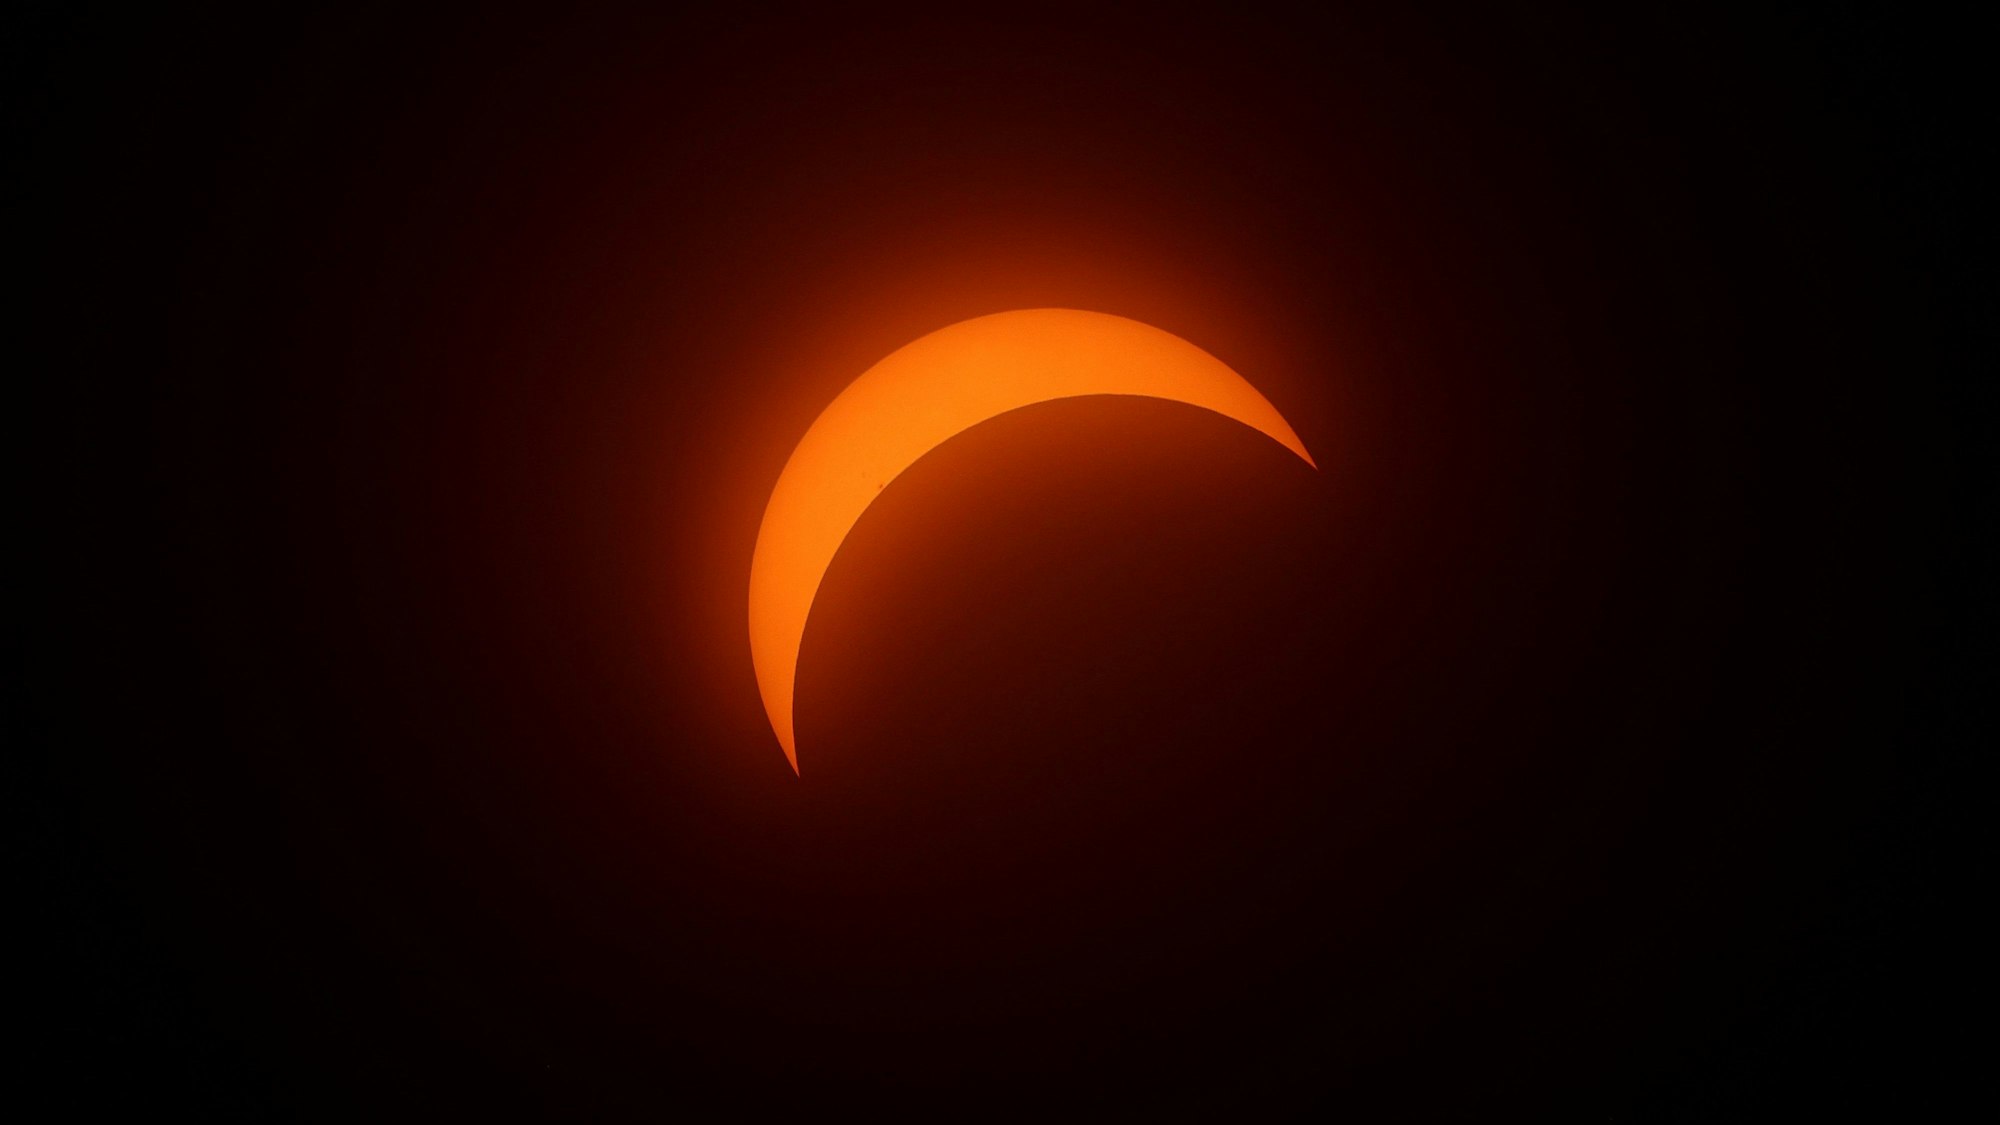 MARTIN, OHIO - APRIL 08: A crescent sun is seen during a solar eclipse on April 08, 2024 in Martin Ohio. Millions of people have flocked to areas across North America that are in the "path of totality" in order to experience a total solar eclipse. During the event, the moon will pass in between the sun and the Earth, appearing to block the sun.   Gregory Shamus/Getty Images/AFP (Photo by Gregory Shamus / GETTY IMAGES NORTH AMERICA / Getty Images via AFP)